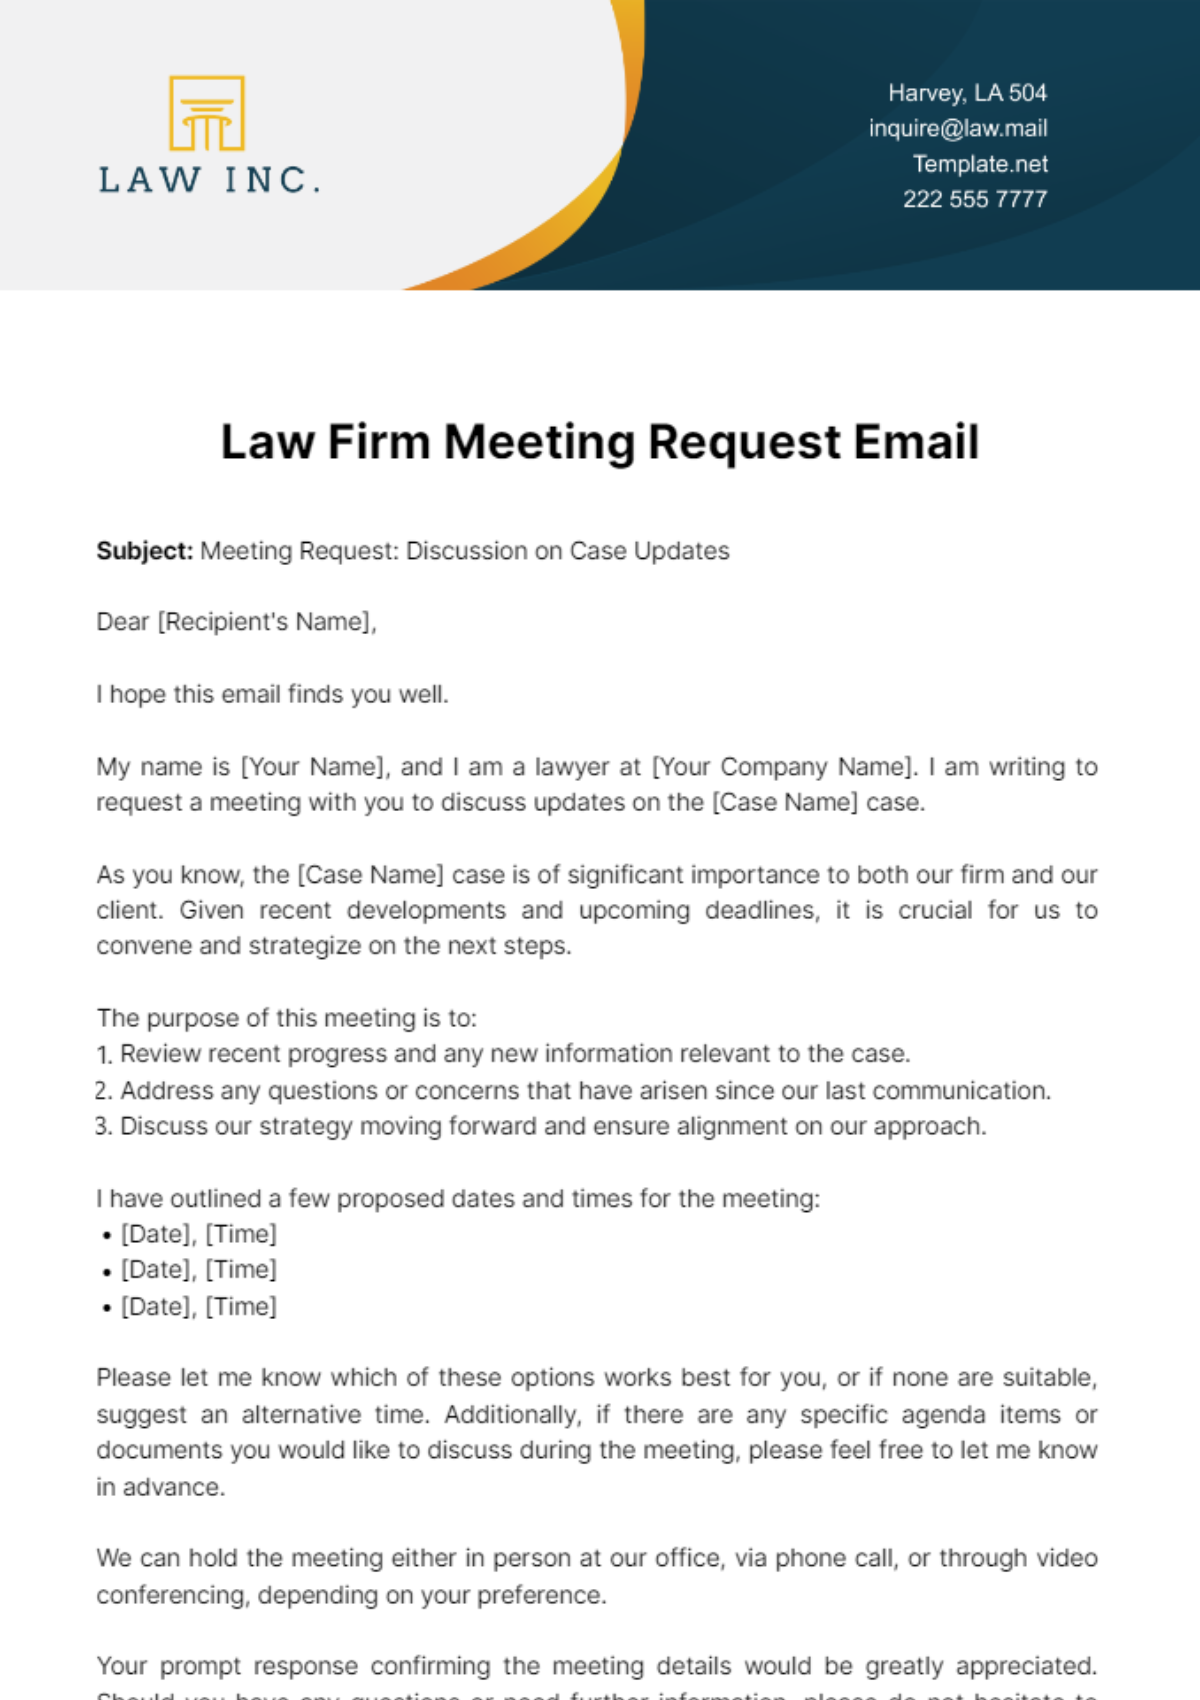 Law Firm Meeting Request Email Template